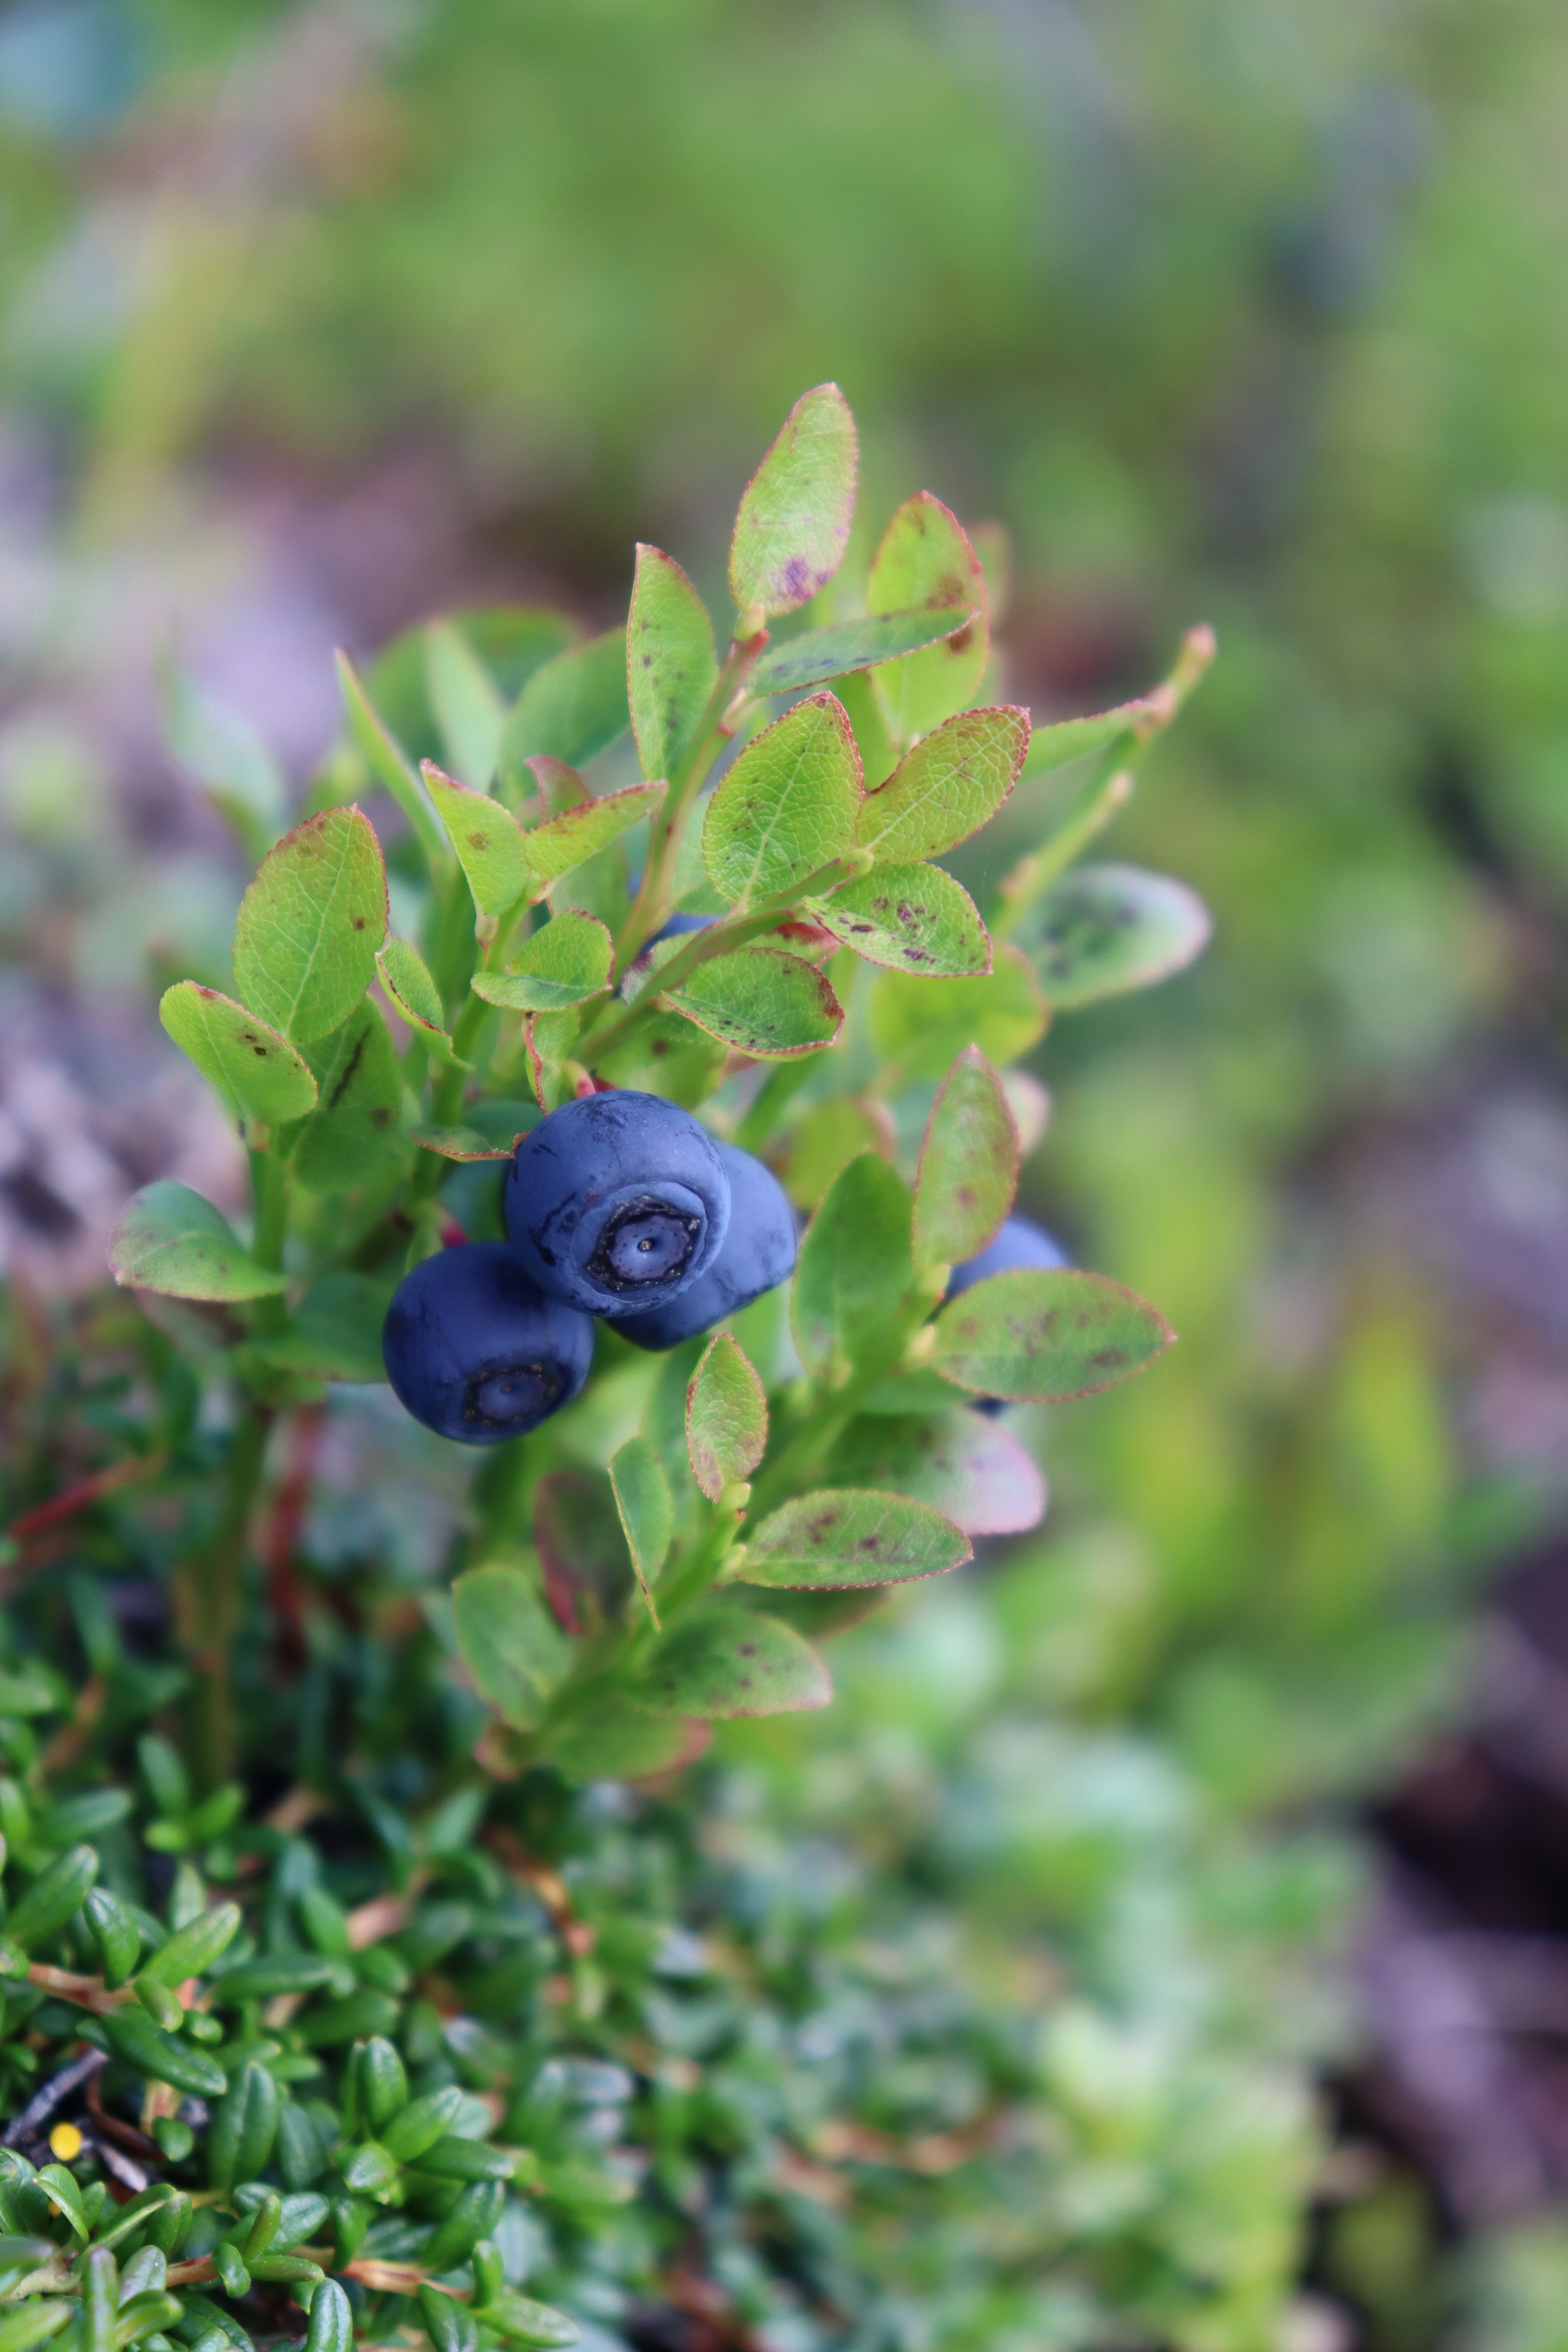 day outing - My, Walk, Hills, Heather, Pine, Day, The photo, North, Arctic, Murmansk region, August, Sortie, Canon, Blueberry, A rock, Longpost